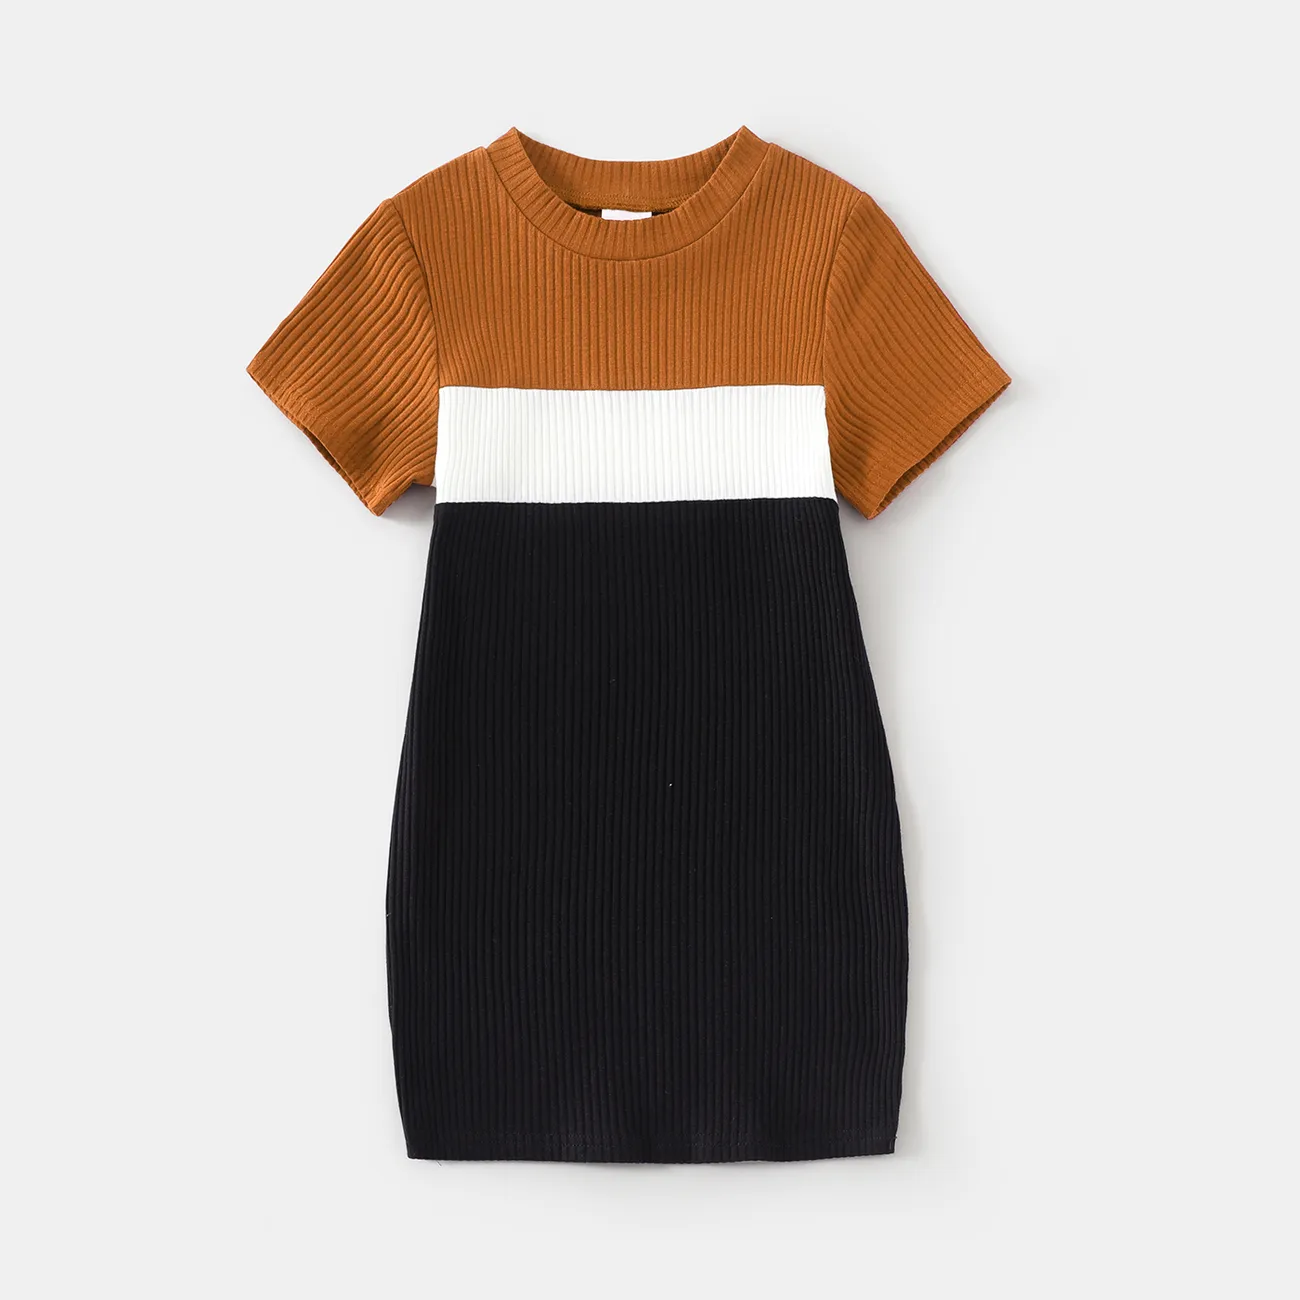 Family Matching Cotton Short-sleeve Colorblock Rib Knit Mock Neck Bodycon Dresses and Tops Sets YellowBrown big image 1